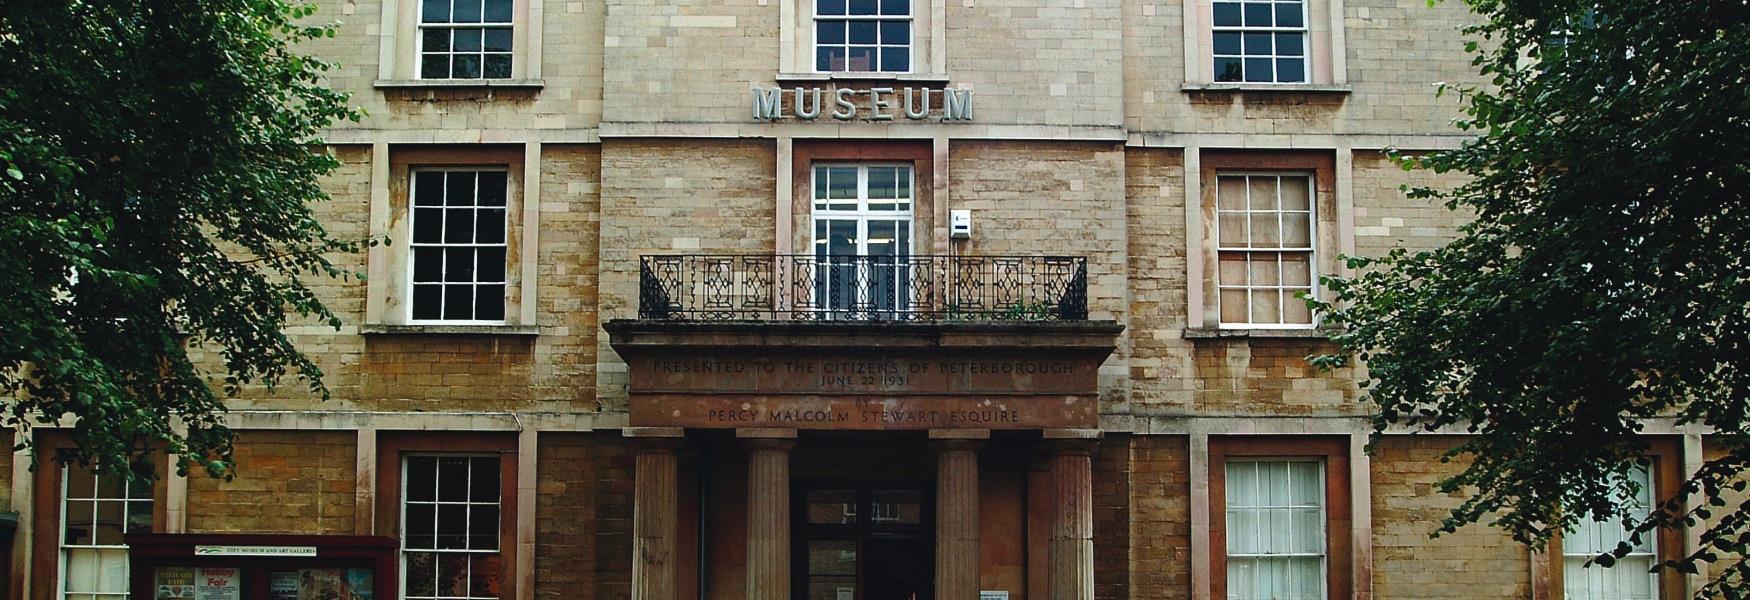 Image of the front entrance of the Peterborough Museum